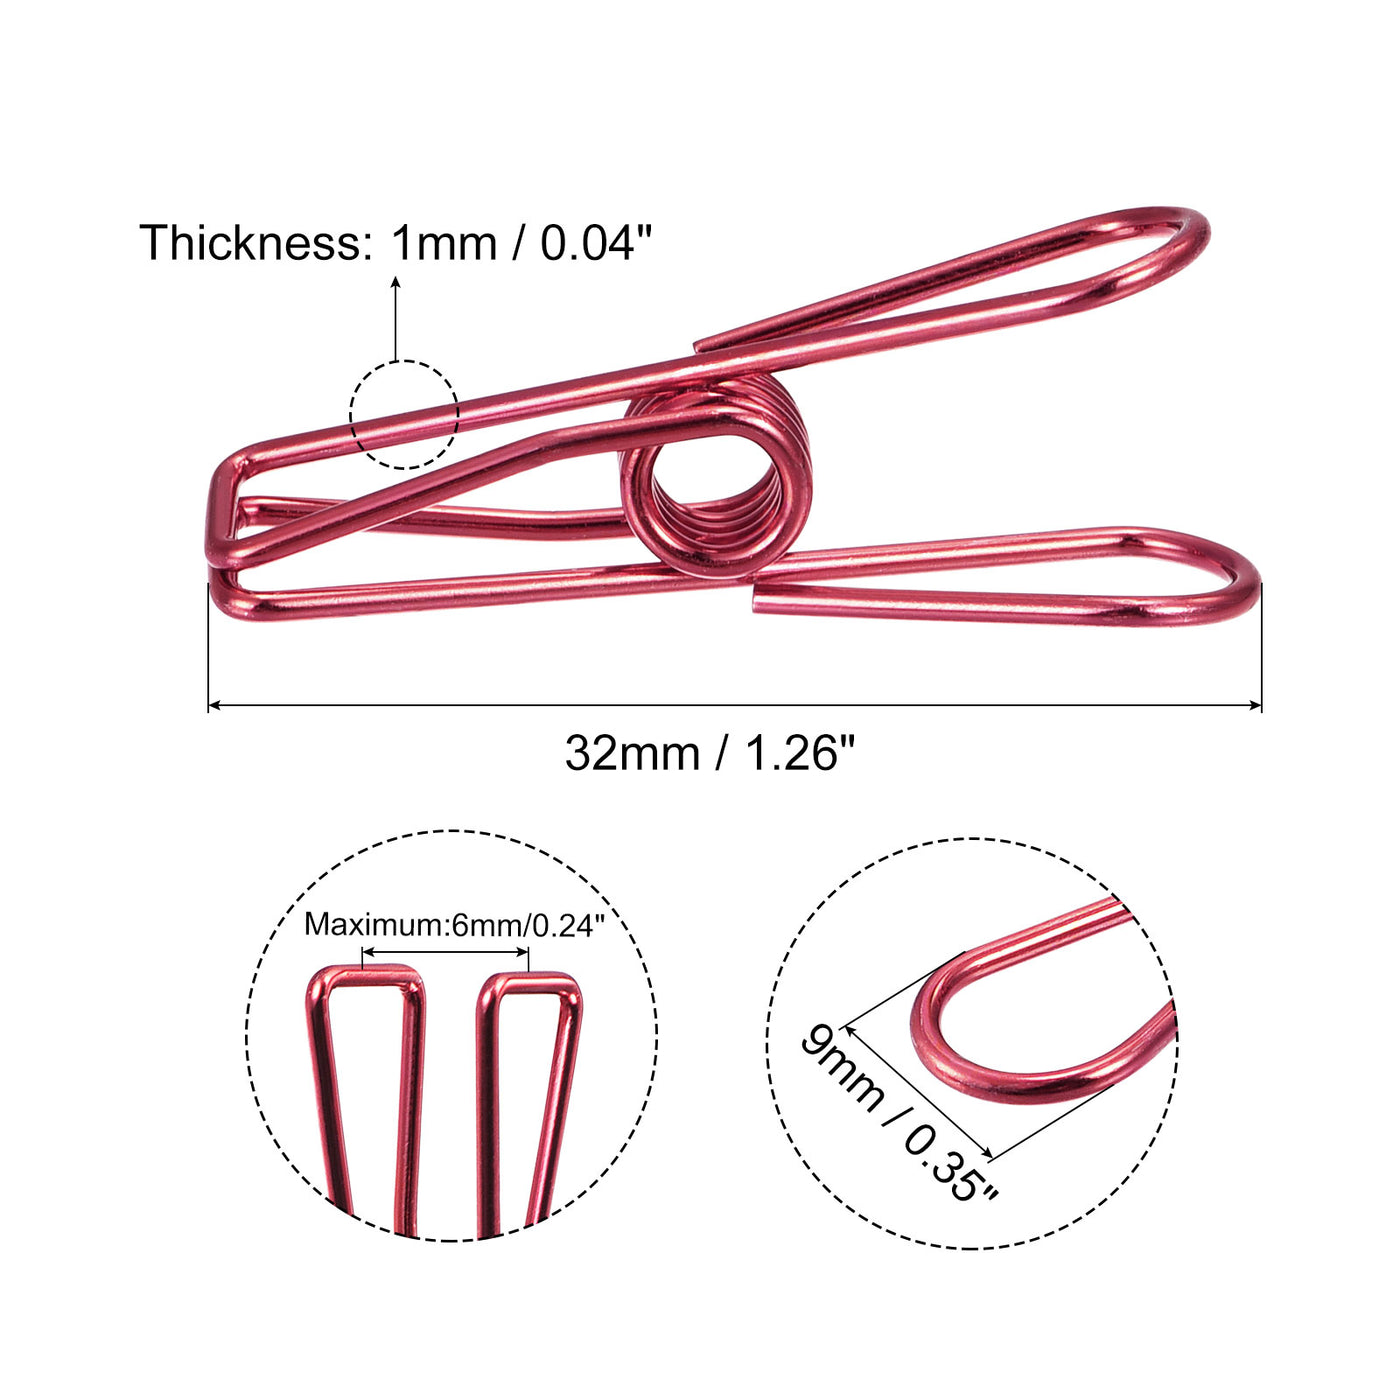 uxcell Uxcell Tablecloth Clips, 32mm Carbon Steel Clamps for Fixing Table Cloth, Red 16 Pcs